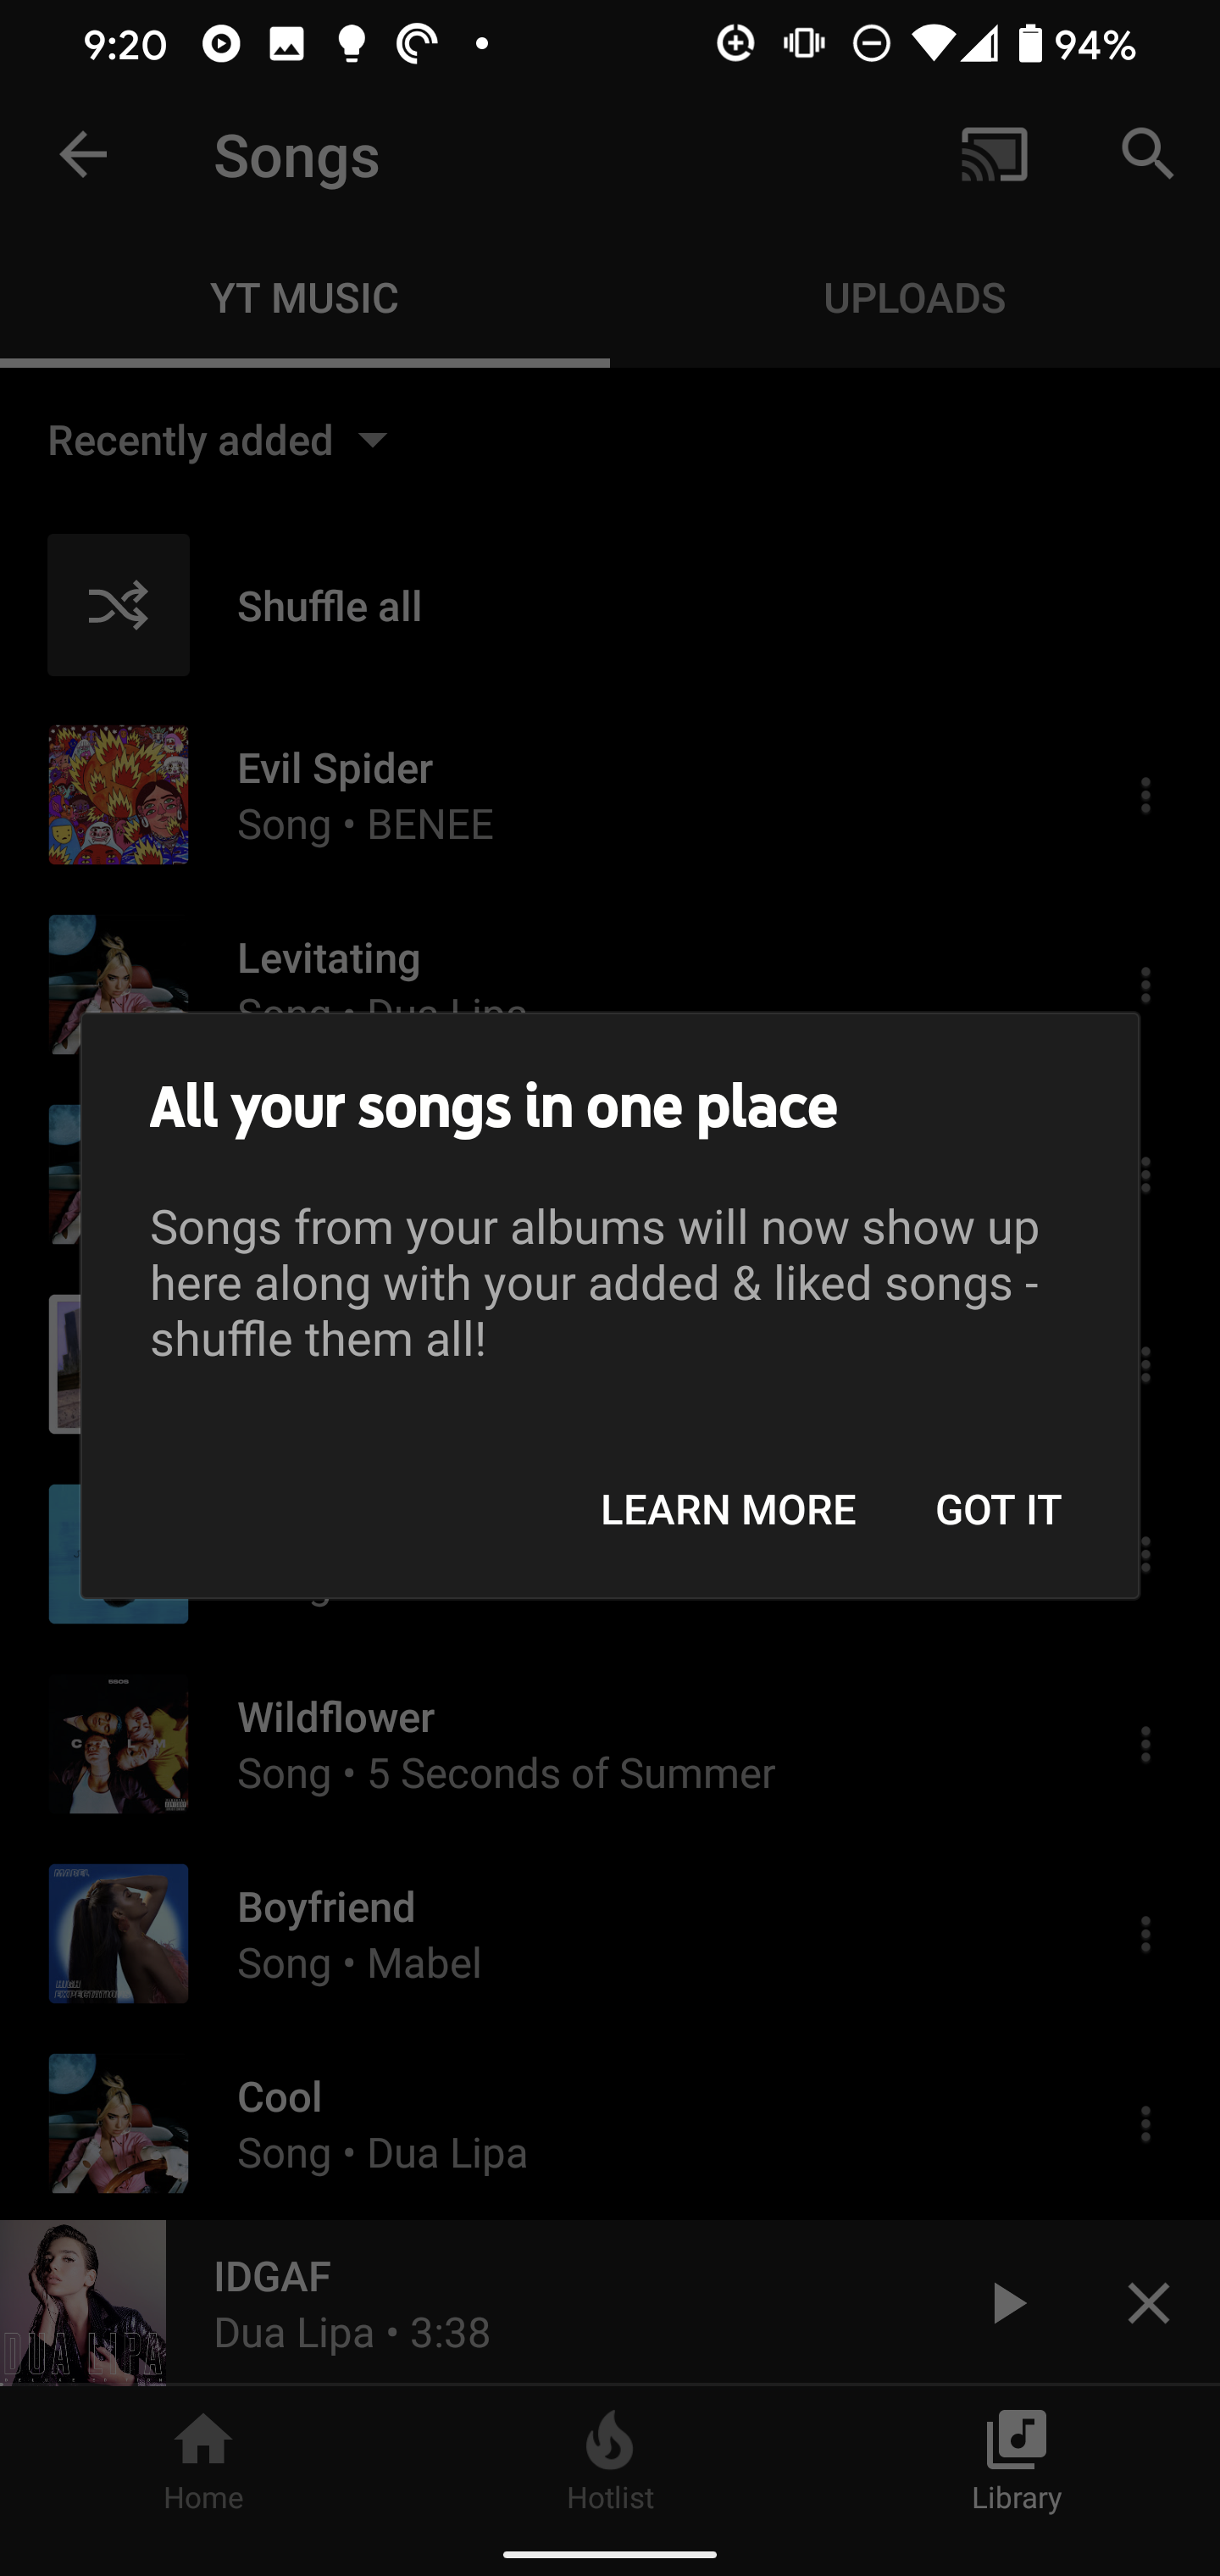 youtube music download library